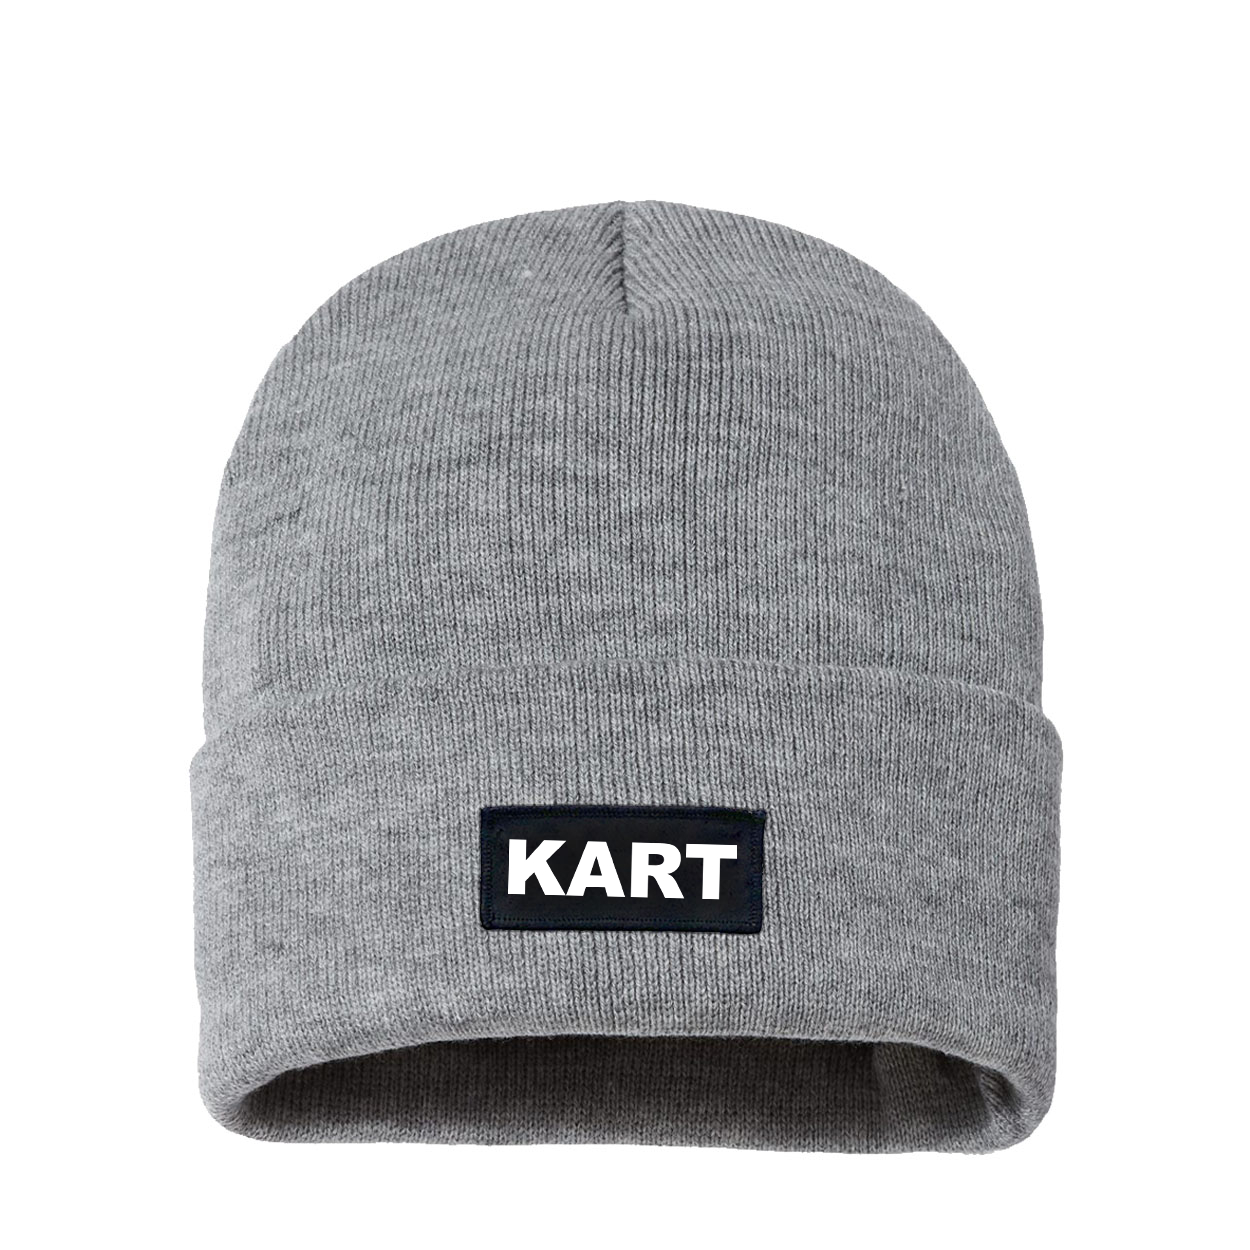 Kart Brand Logo Night Out Woven Patch Sherpa Lined Cuffed Beanie Heather Gray